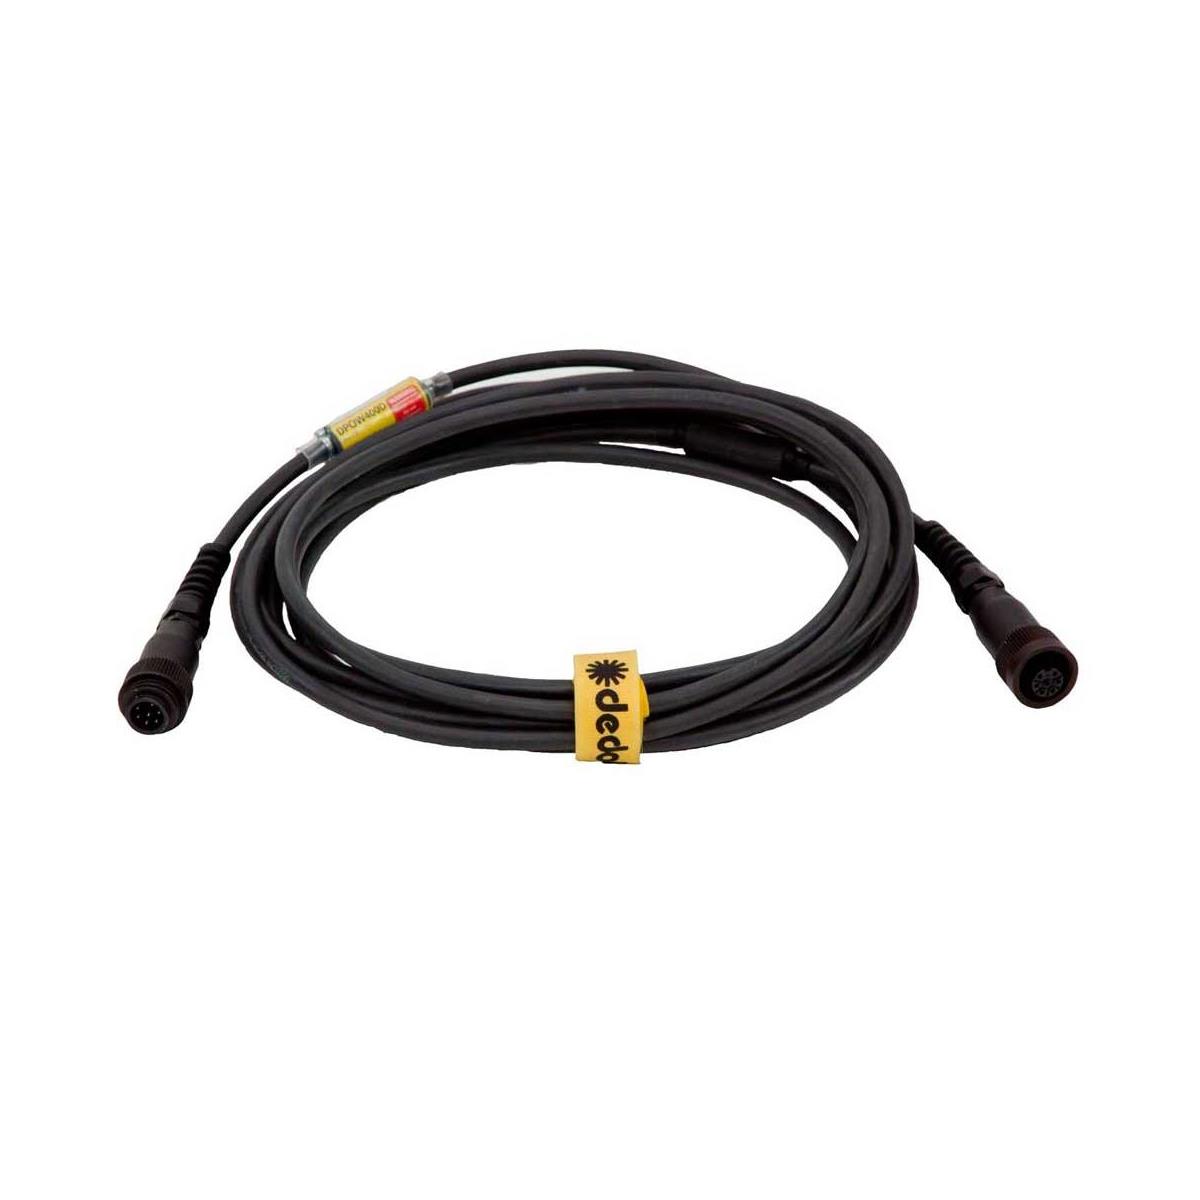 Image of Dedolight 23' Light Head Cable for DLH200D/S Fixtures